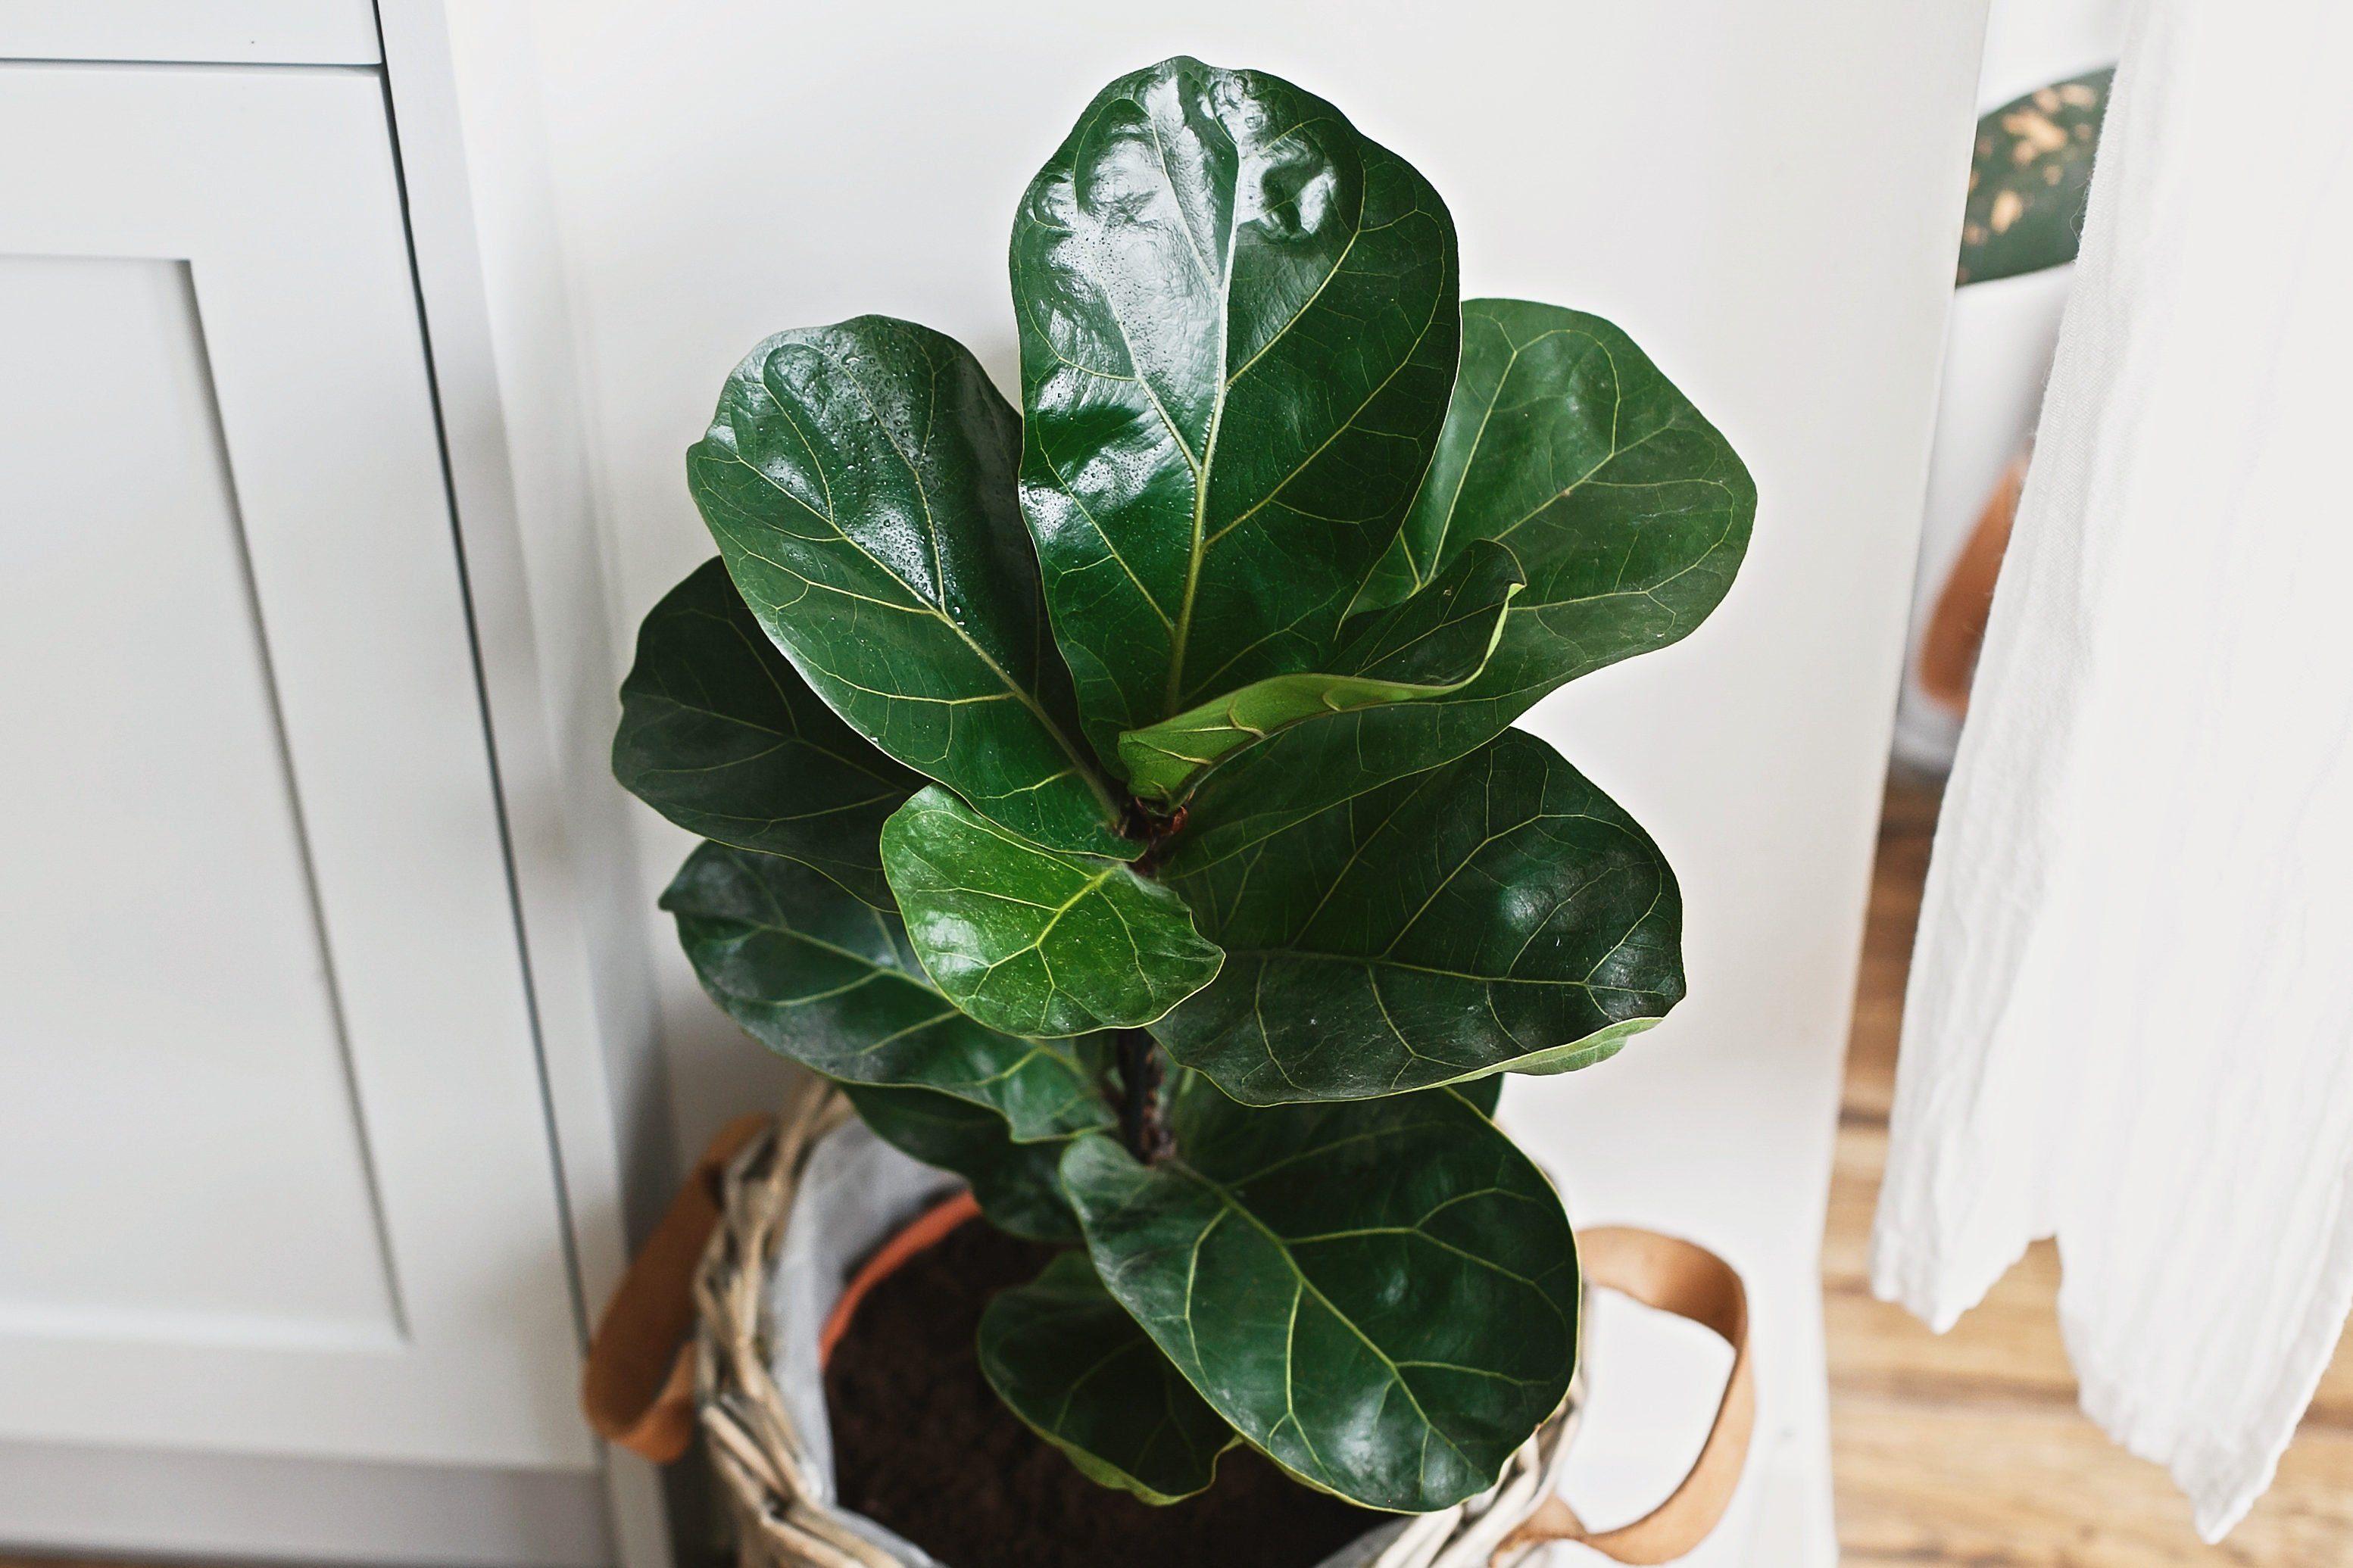 Big fiddle leaf fig tree in stylish modern pot near kitchen furniture. Ficus lyrata leaves, stylish plant on wooden floor in kitchen. Floral decor in modern home